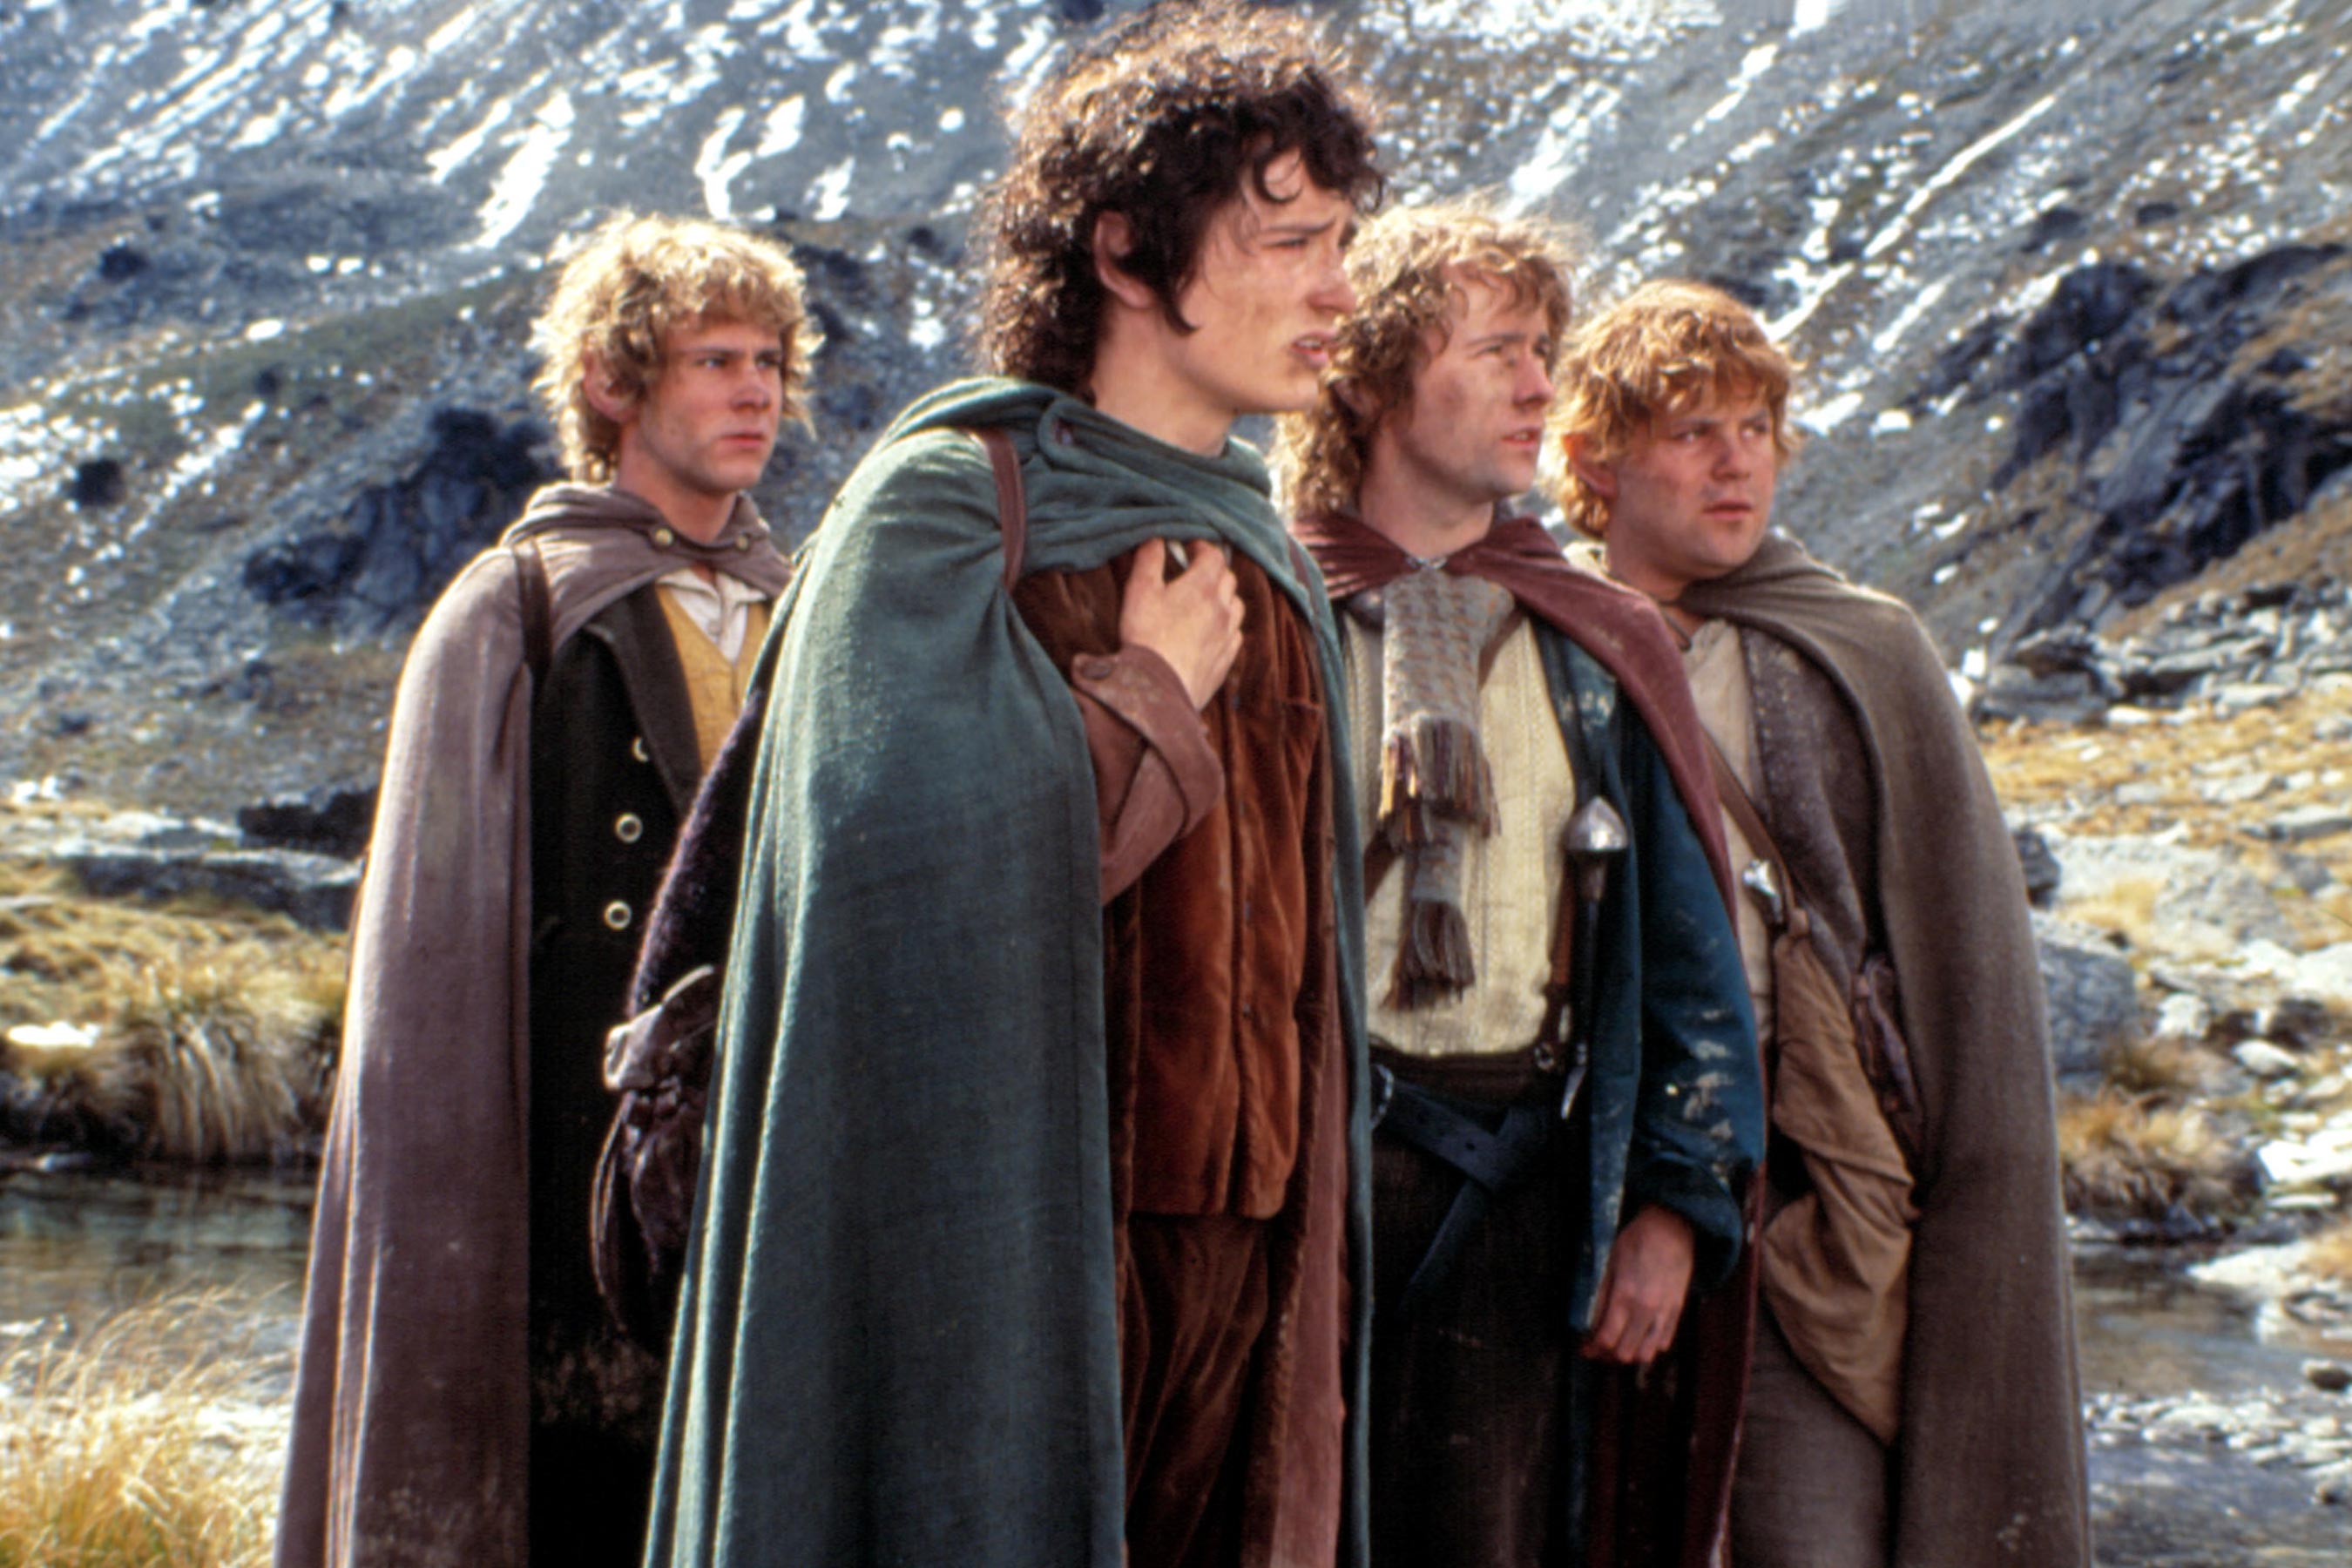 Lord of the Rings,' 'The Hobbit' Movie, Gaming Rights Up for Sale